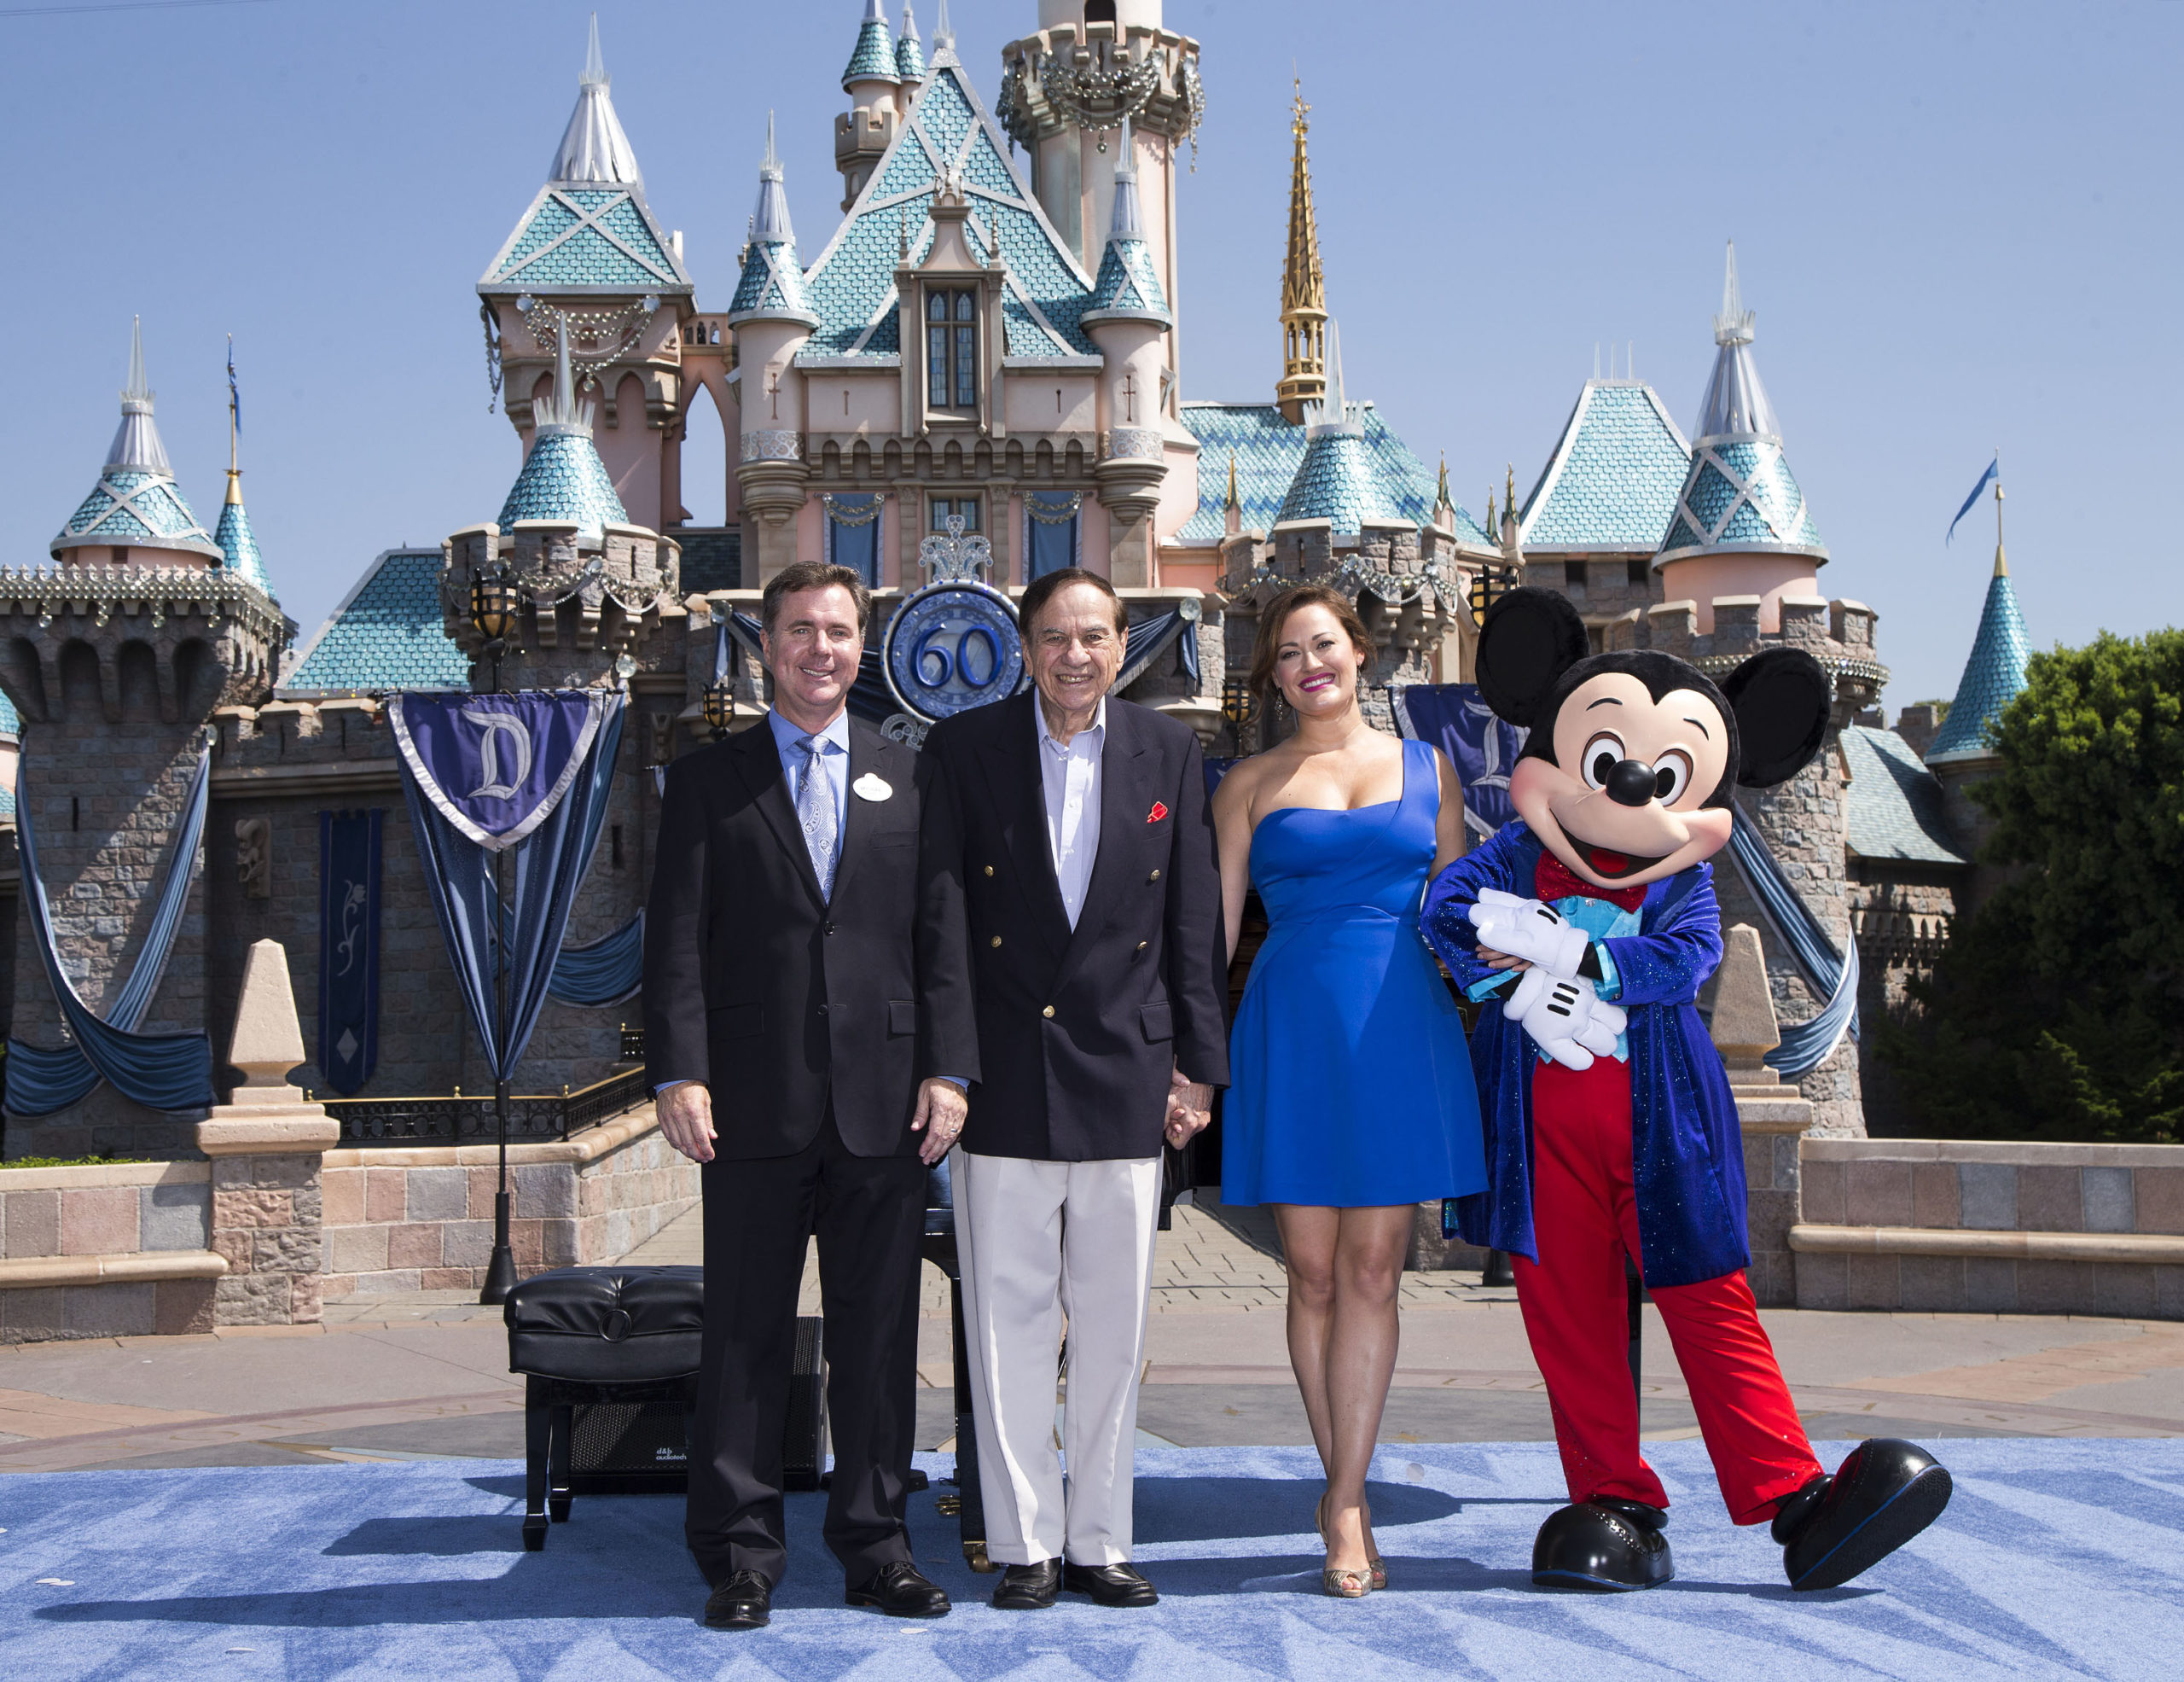 ANAHEIM, CA - JULY 17: In this handout photo provided by Disney parks, DAZZLING DAY - Academy Award-winning composer Richard Sherman and actress and singer Ashley Brown join President of the Disneyland Resort Michael Colglazier (L) and Mickey Mouse to celebrate the 60th anniversary of Disneyland park July 17, 2015 in Anaheim, California. Celebrating six decades of magic, the Disneyland Resort Diamond Celebration features three new nighttime spectaculars that immerse guests in the worlds of Disney stories like never before with "Paint the Night," the first all-LED parade at the resort; "Disneyland Forever," a reinvention of classic fireworks that adds projections to pyrotechnics to transform the park experience; and a moving new version of "World of Color" that celebrates Walt Disney's dream for Disneyland. (Photo by Paul Hiffmeyer/Disneyland Resort via Getty Images)